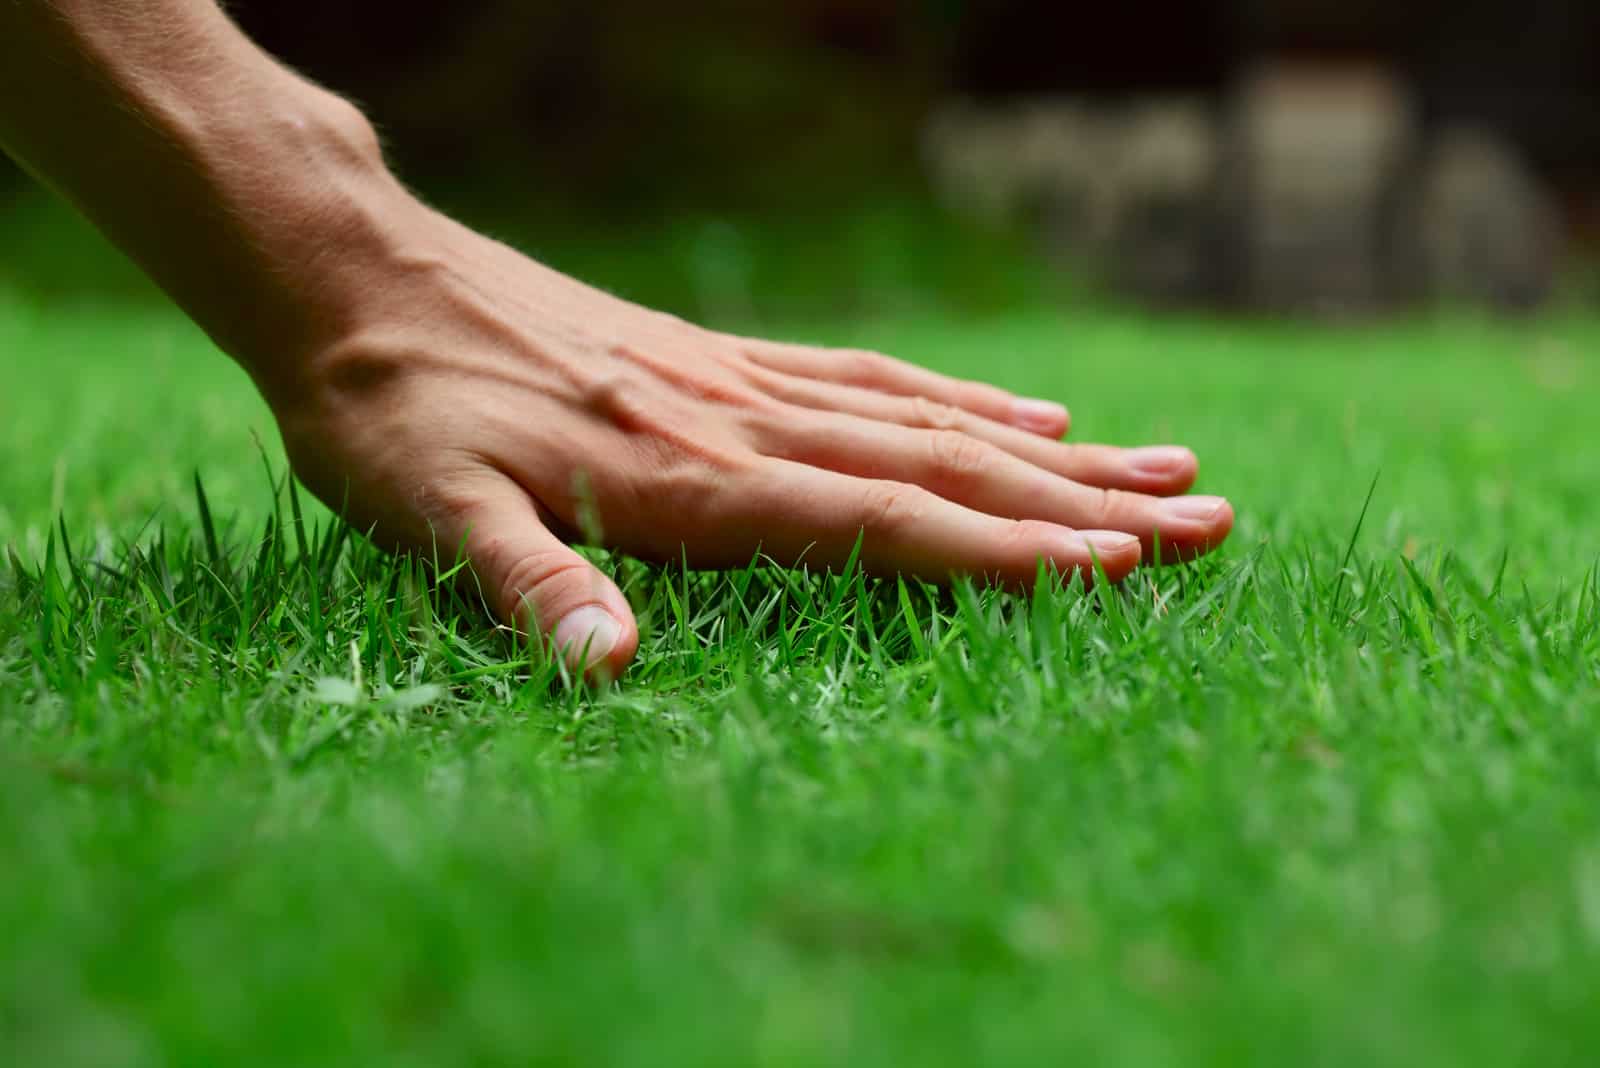 How To Make Lawn Green And Thick: Simple Methods And Handy Tips